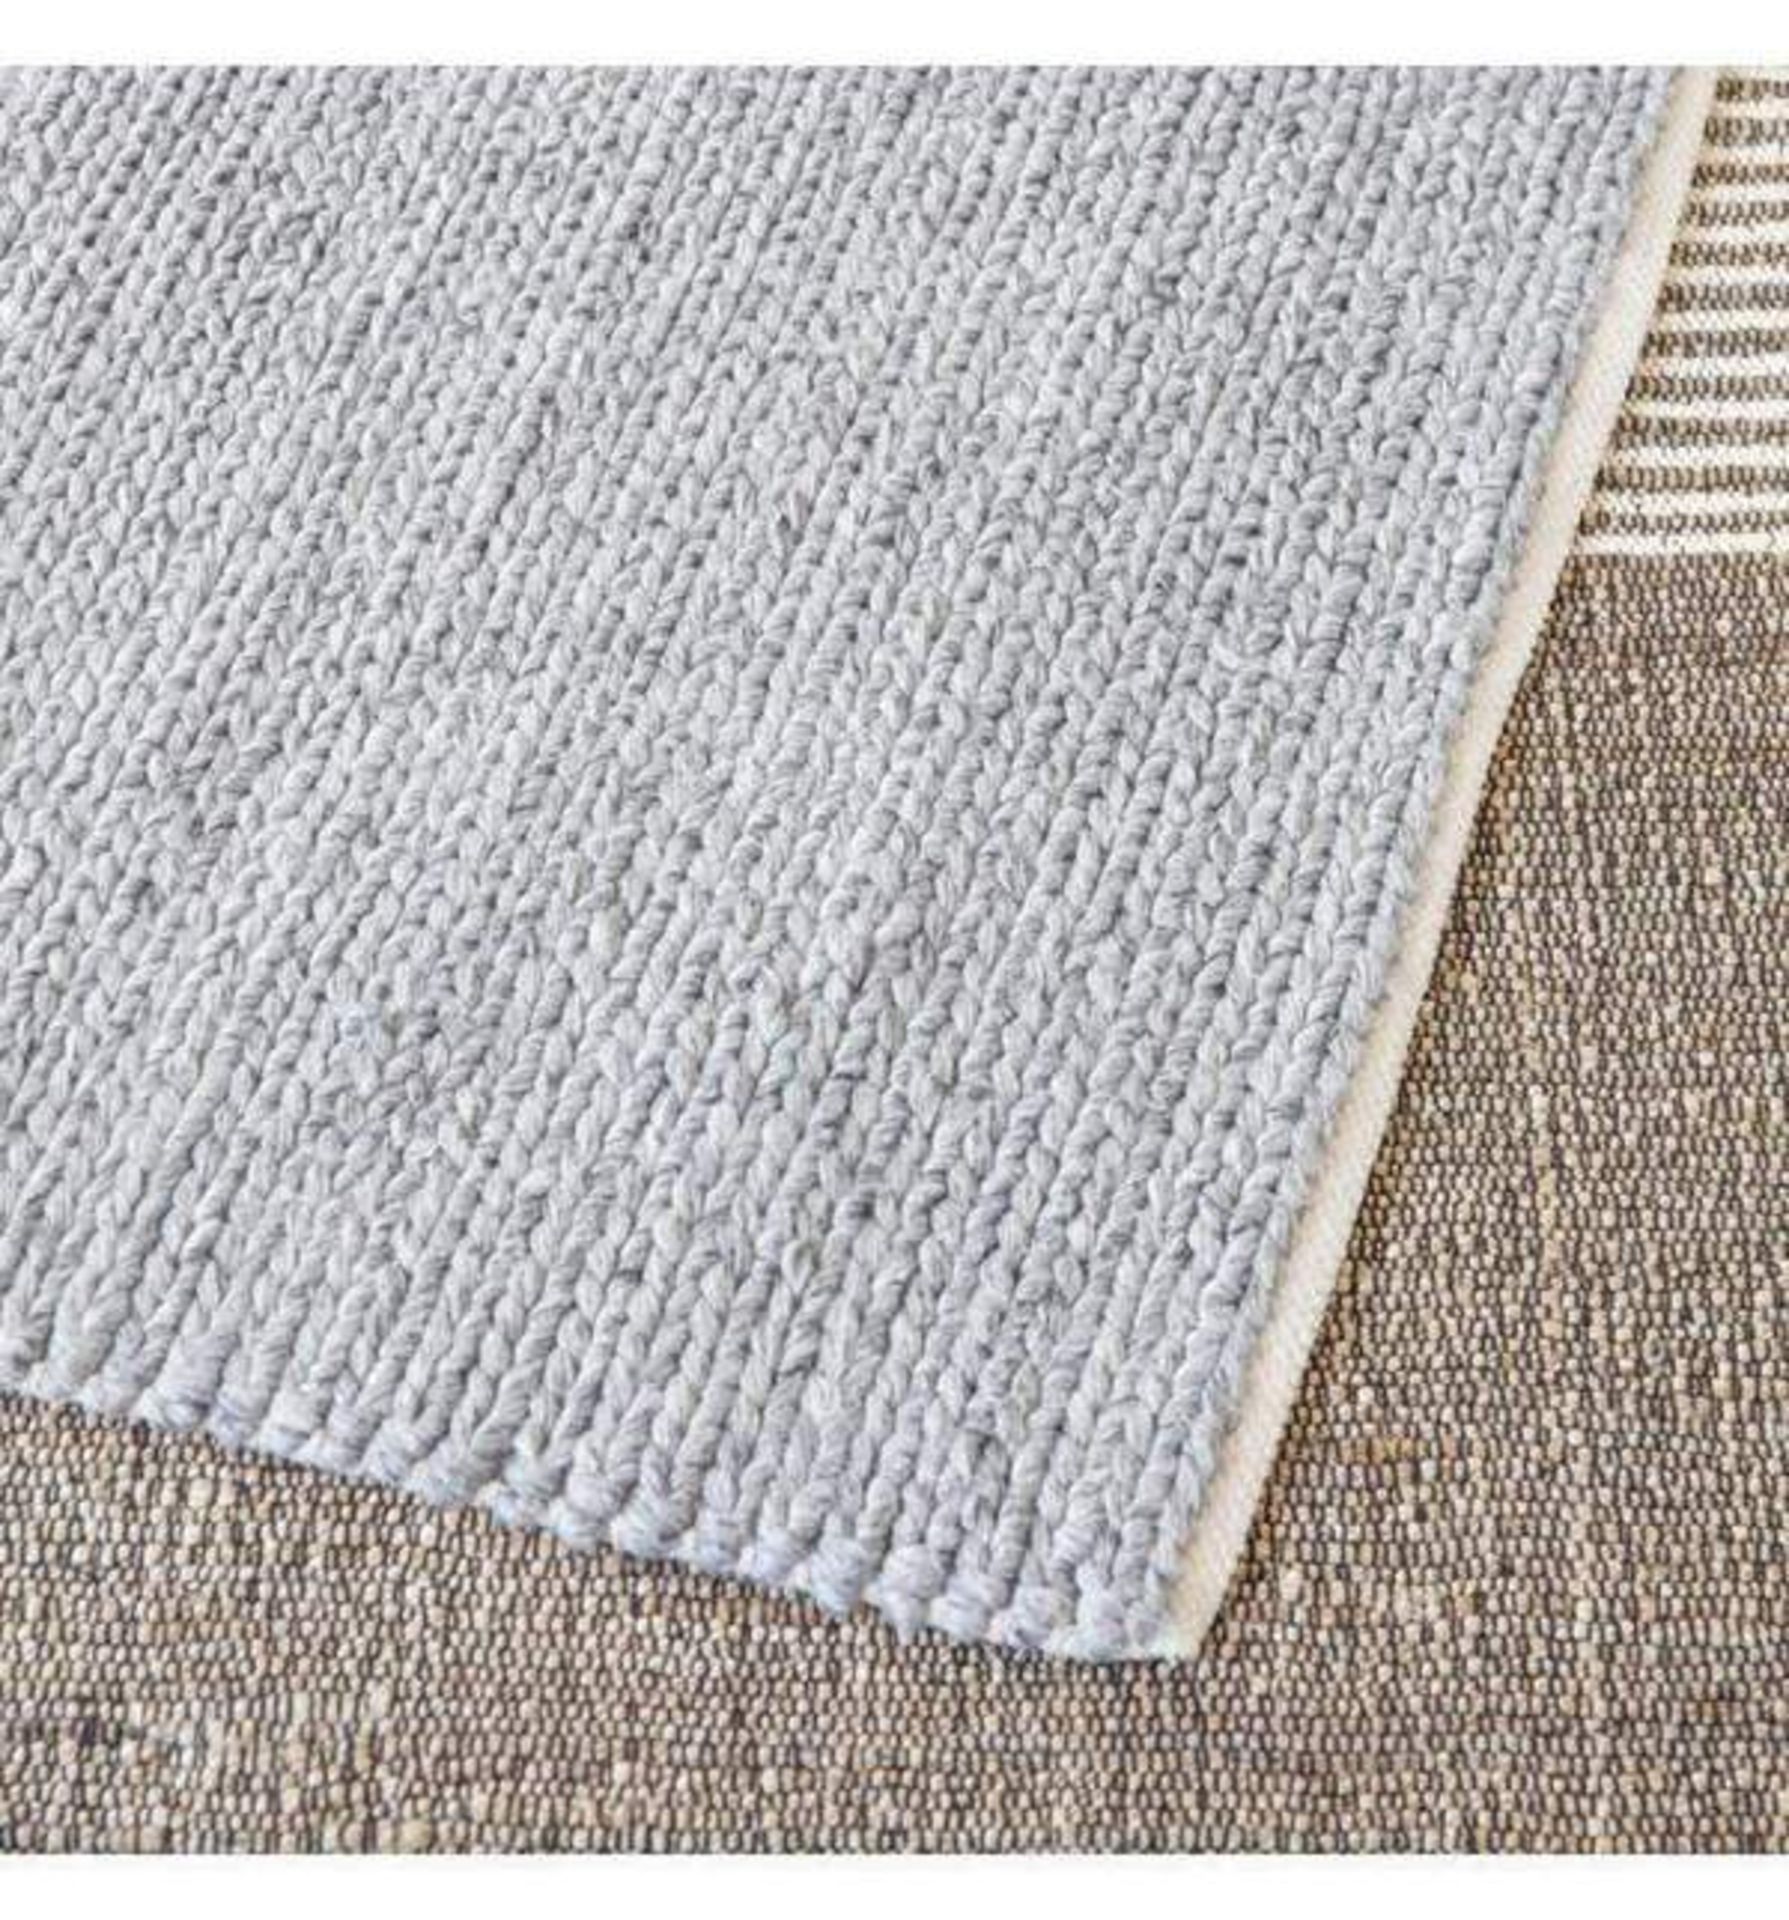 Imperial rug Grey 1600 x 2300mm Bring a traditional meets minimalist vibe to your interior design